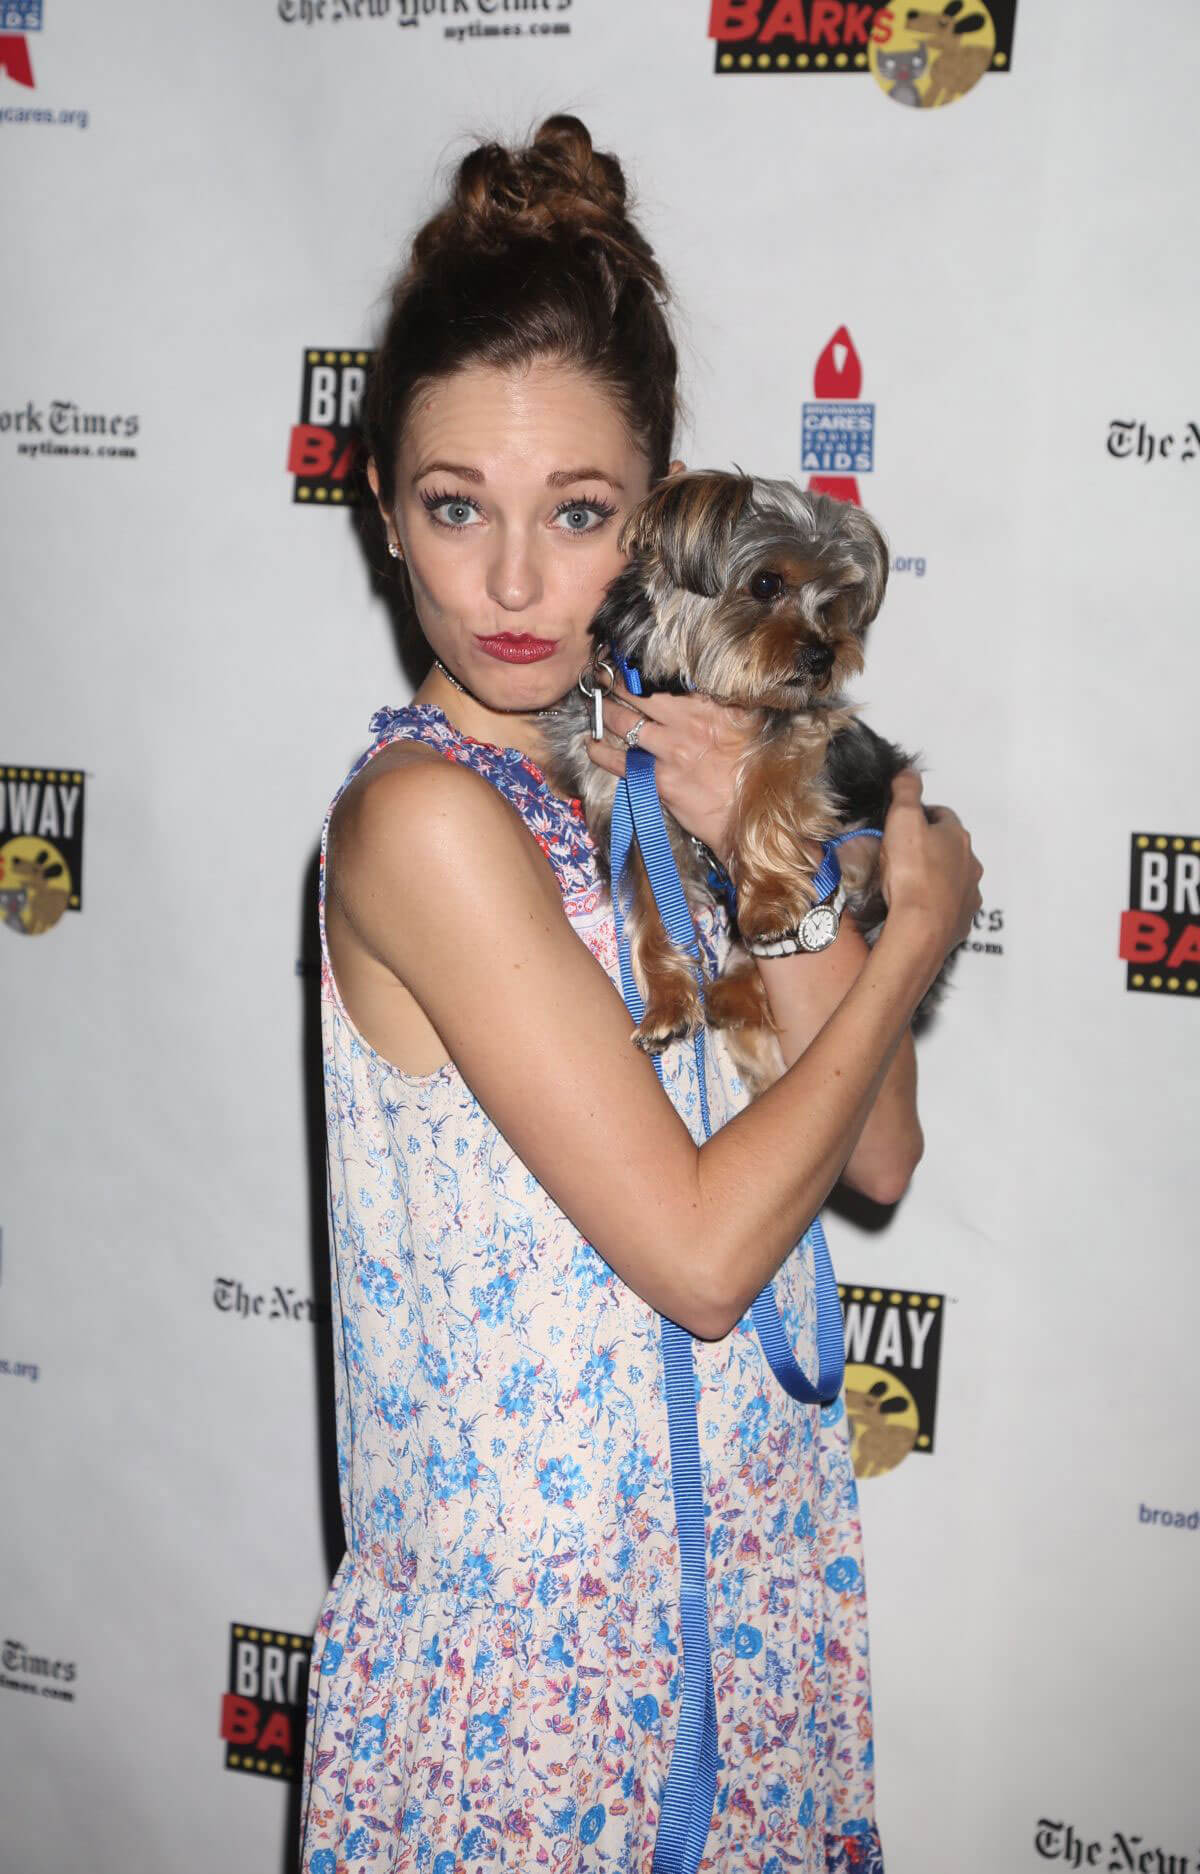 Laura Osnes Stills at 19th Annual Broadway Barks Animal Adoption Event in New York